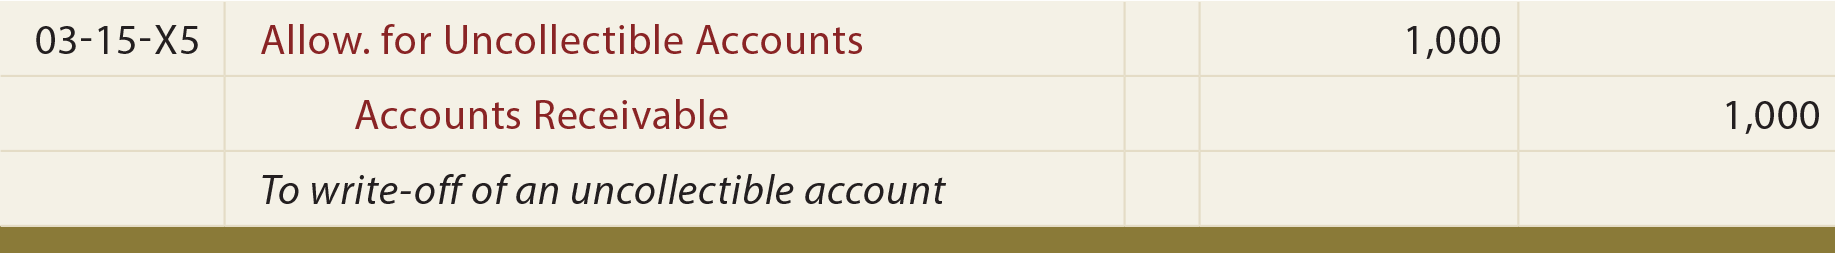 Allowance For Uncollectible Accounts General Journal Entry - Write-off account